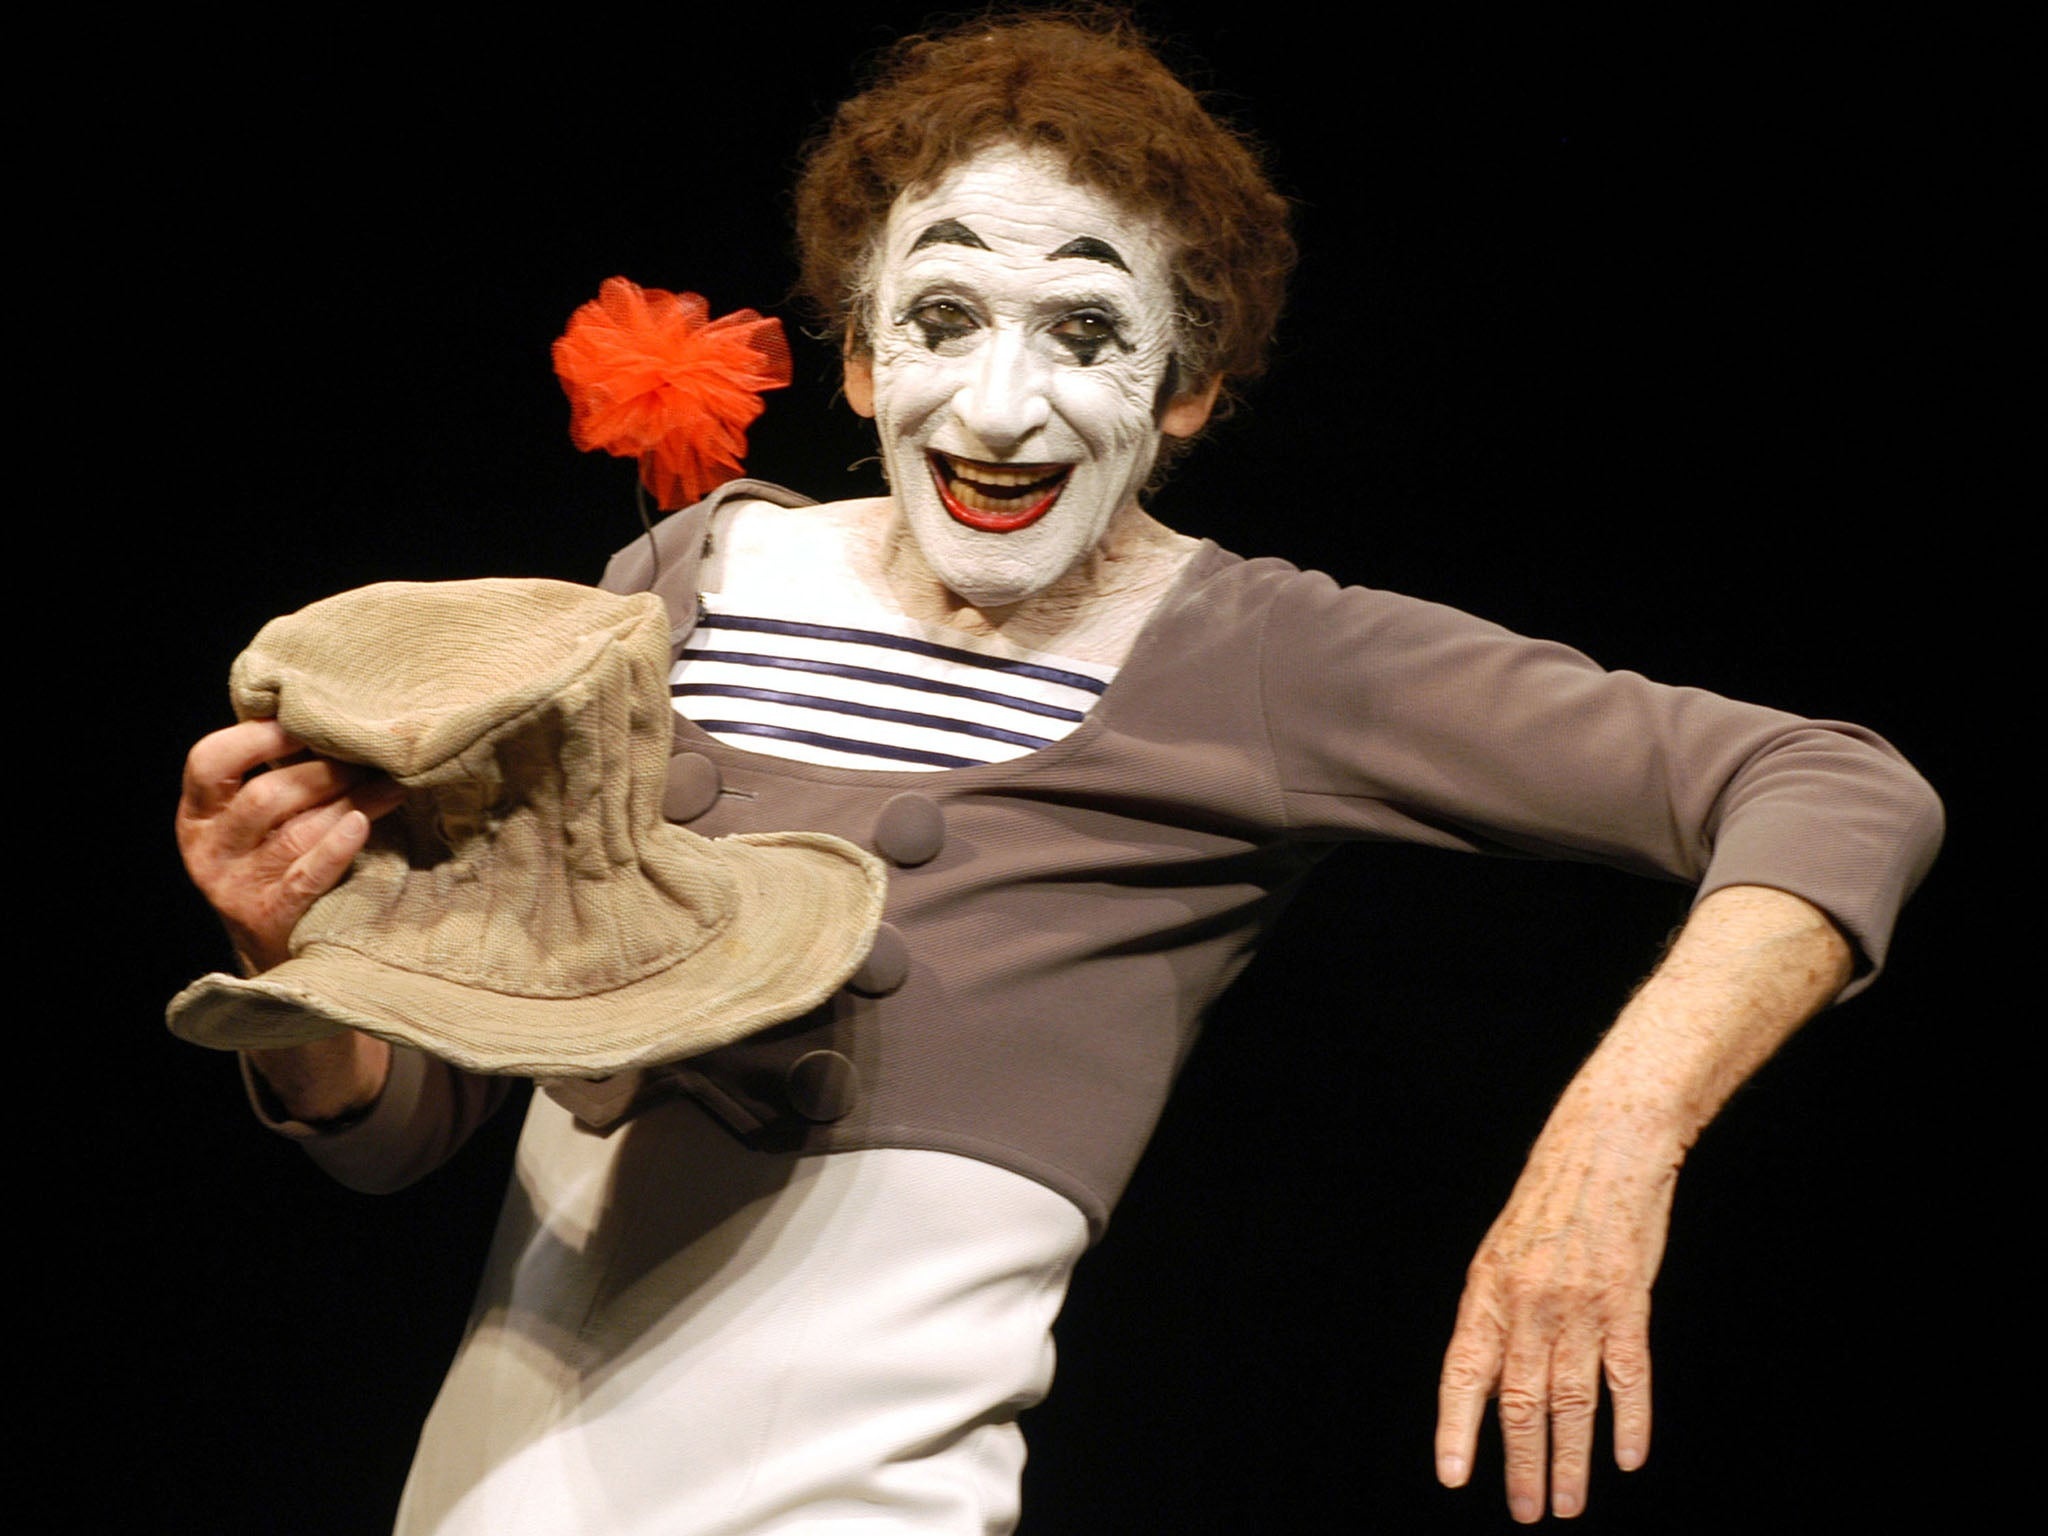 Marcel Marceau: A French actor and mime artist most famous for his stage persona “Bip the Clown”. 2050x1540 HD Wallpaper.